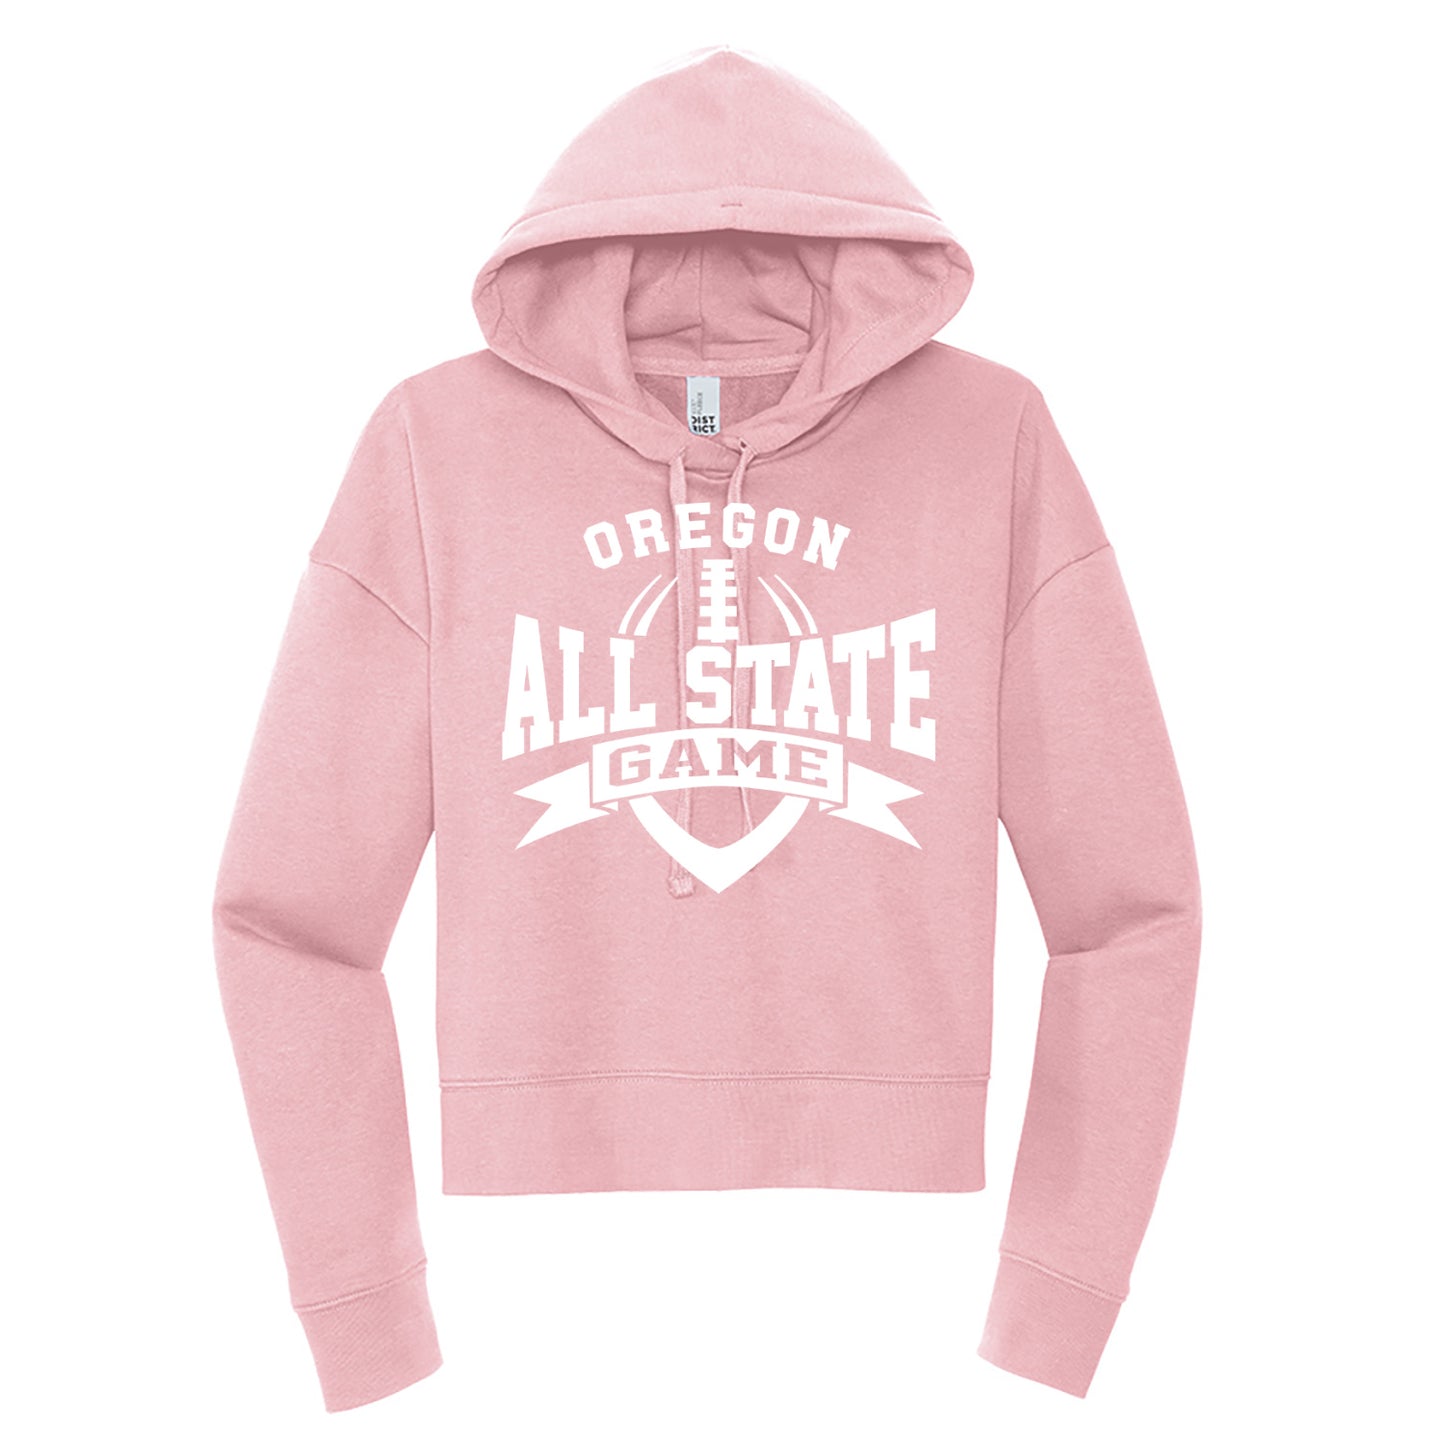 Oregon All State - Women's Hoodie